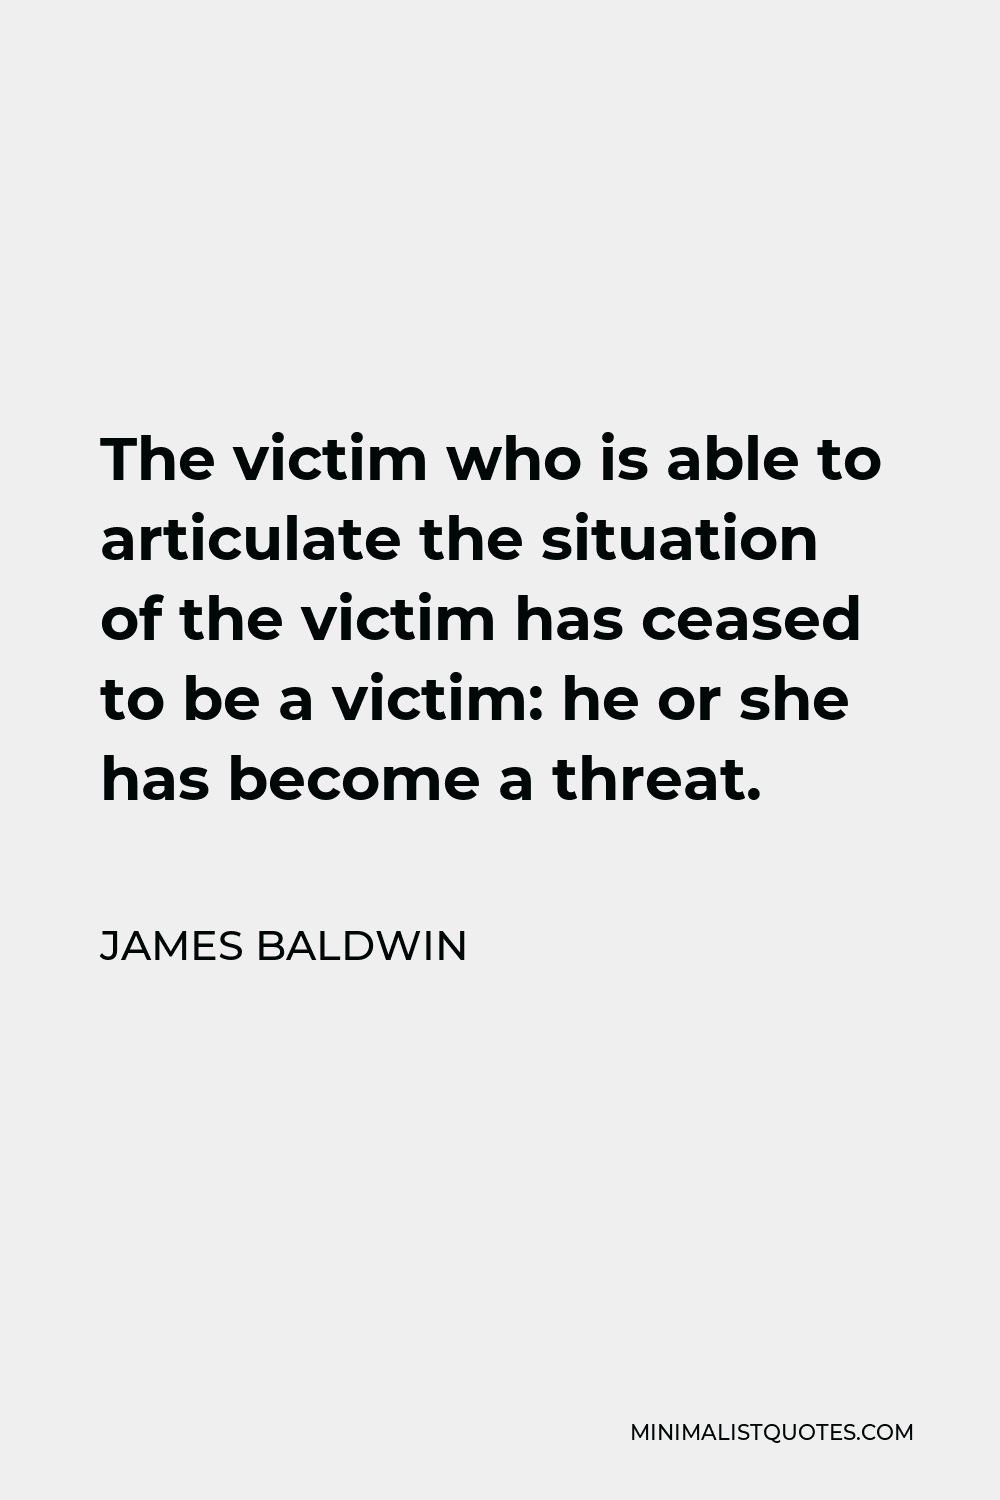 James Baldwin Quote - The victim who is able to articulate the situation of the victim has ceased to be a victim: he or she has become a threat.